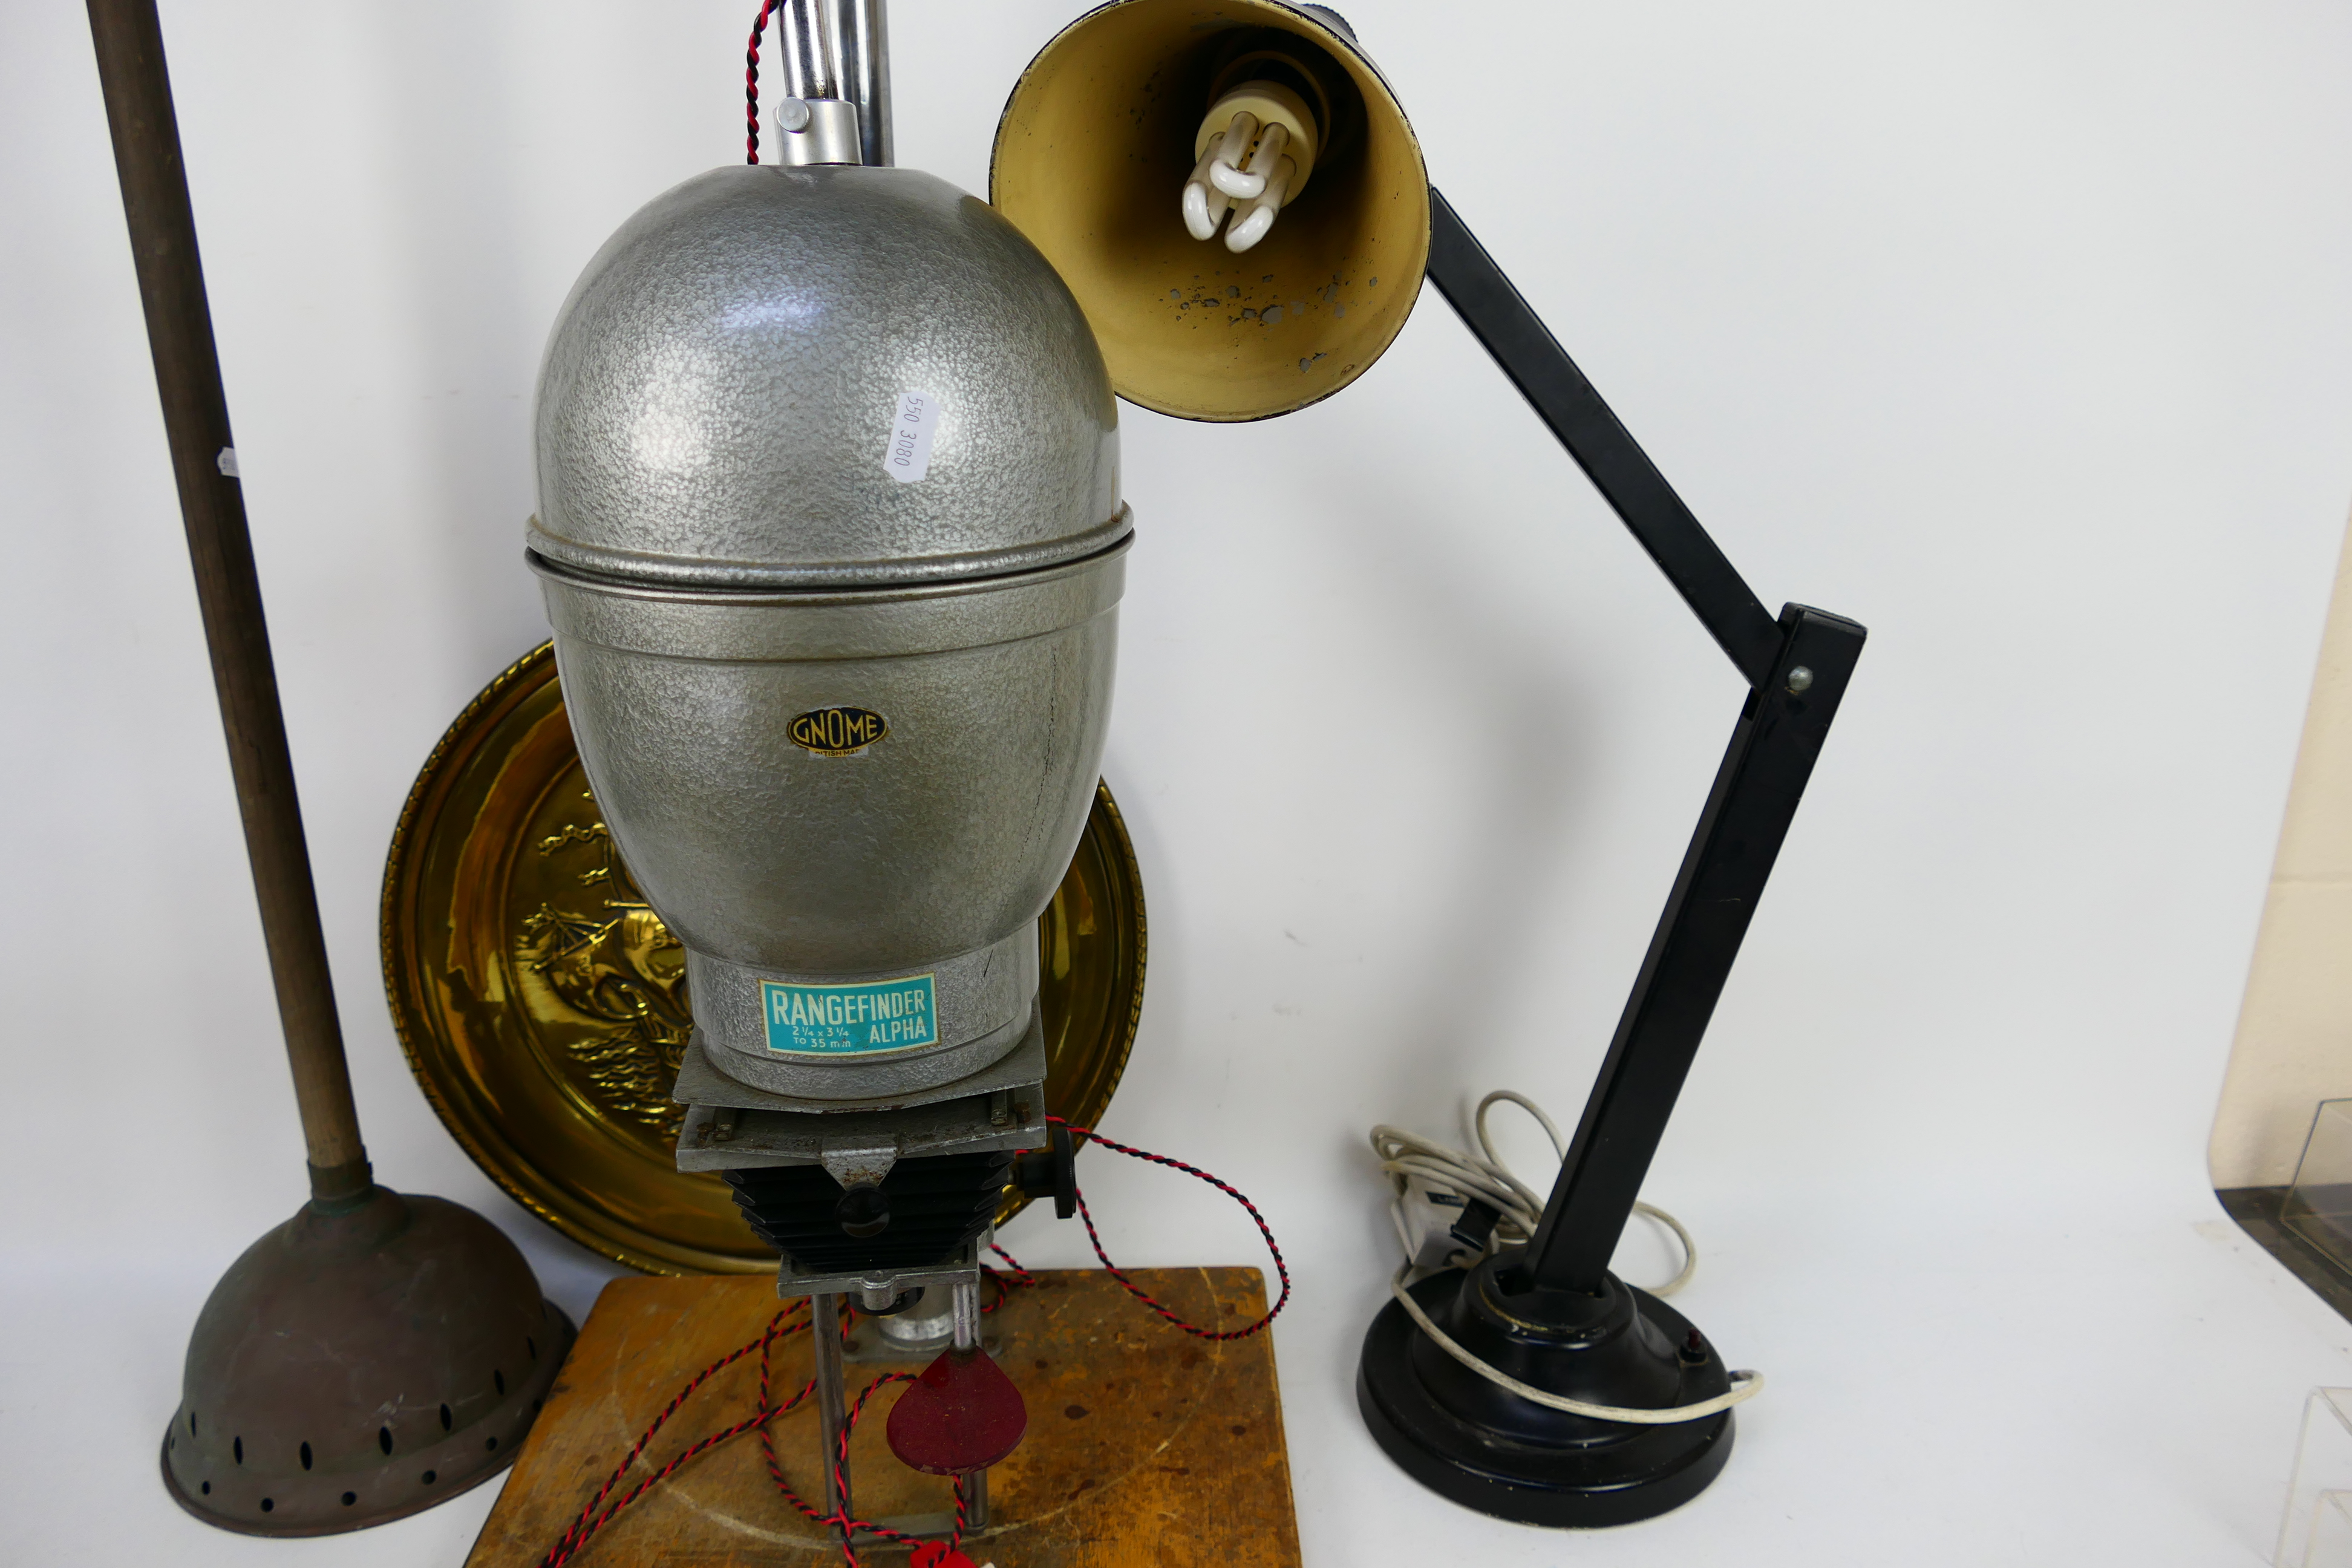 Lot to include a photographic enlarger, washing dolly, anglepoise style light and other. - Image 5 of 8